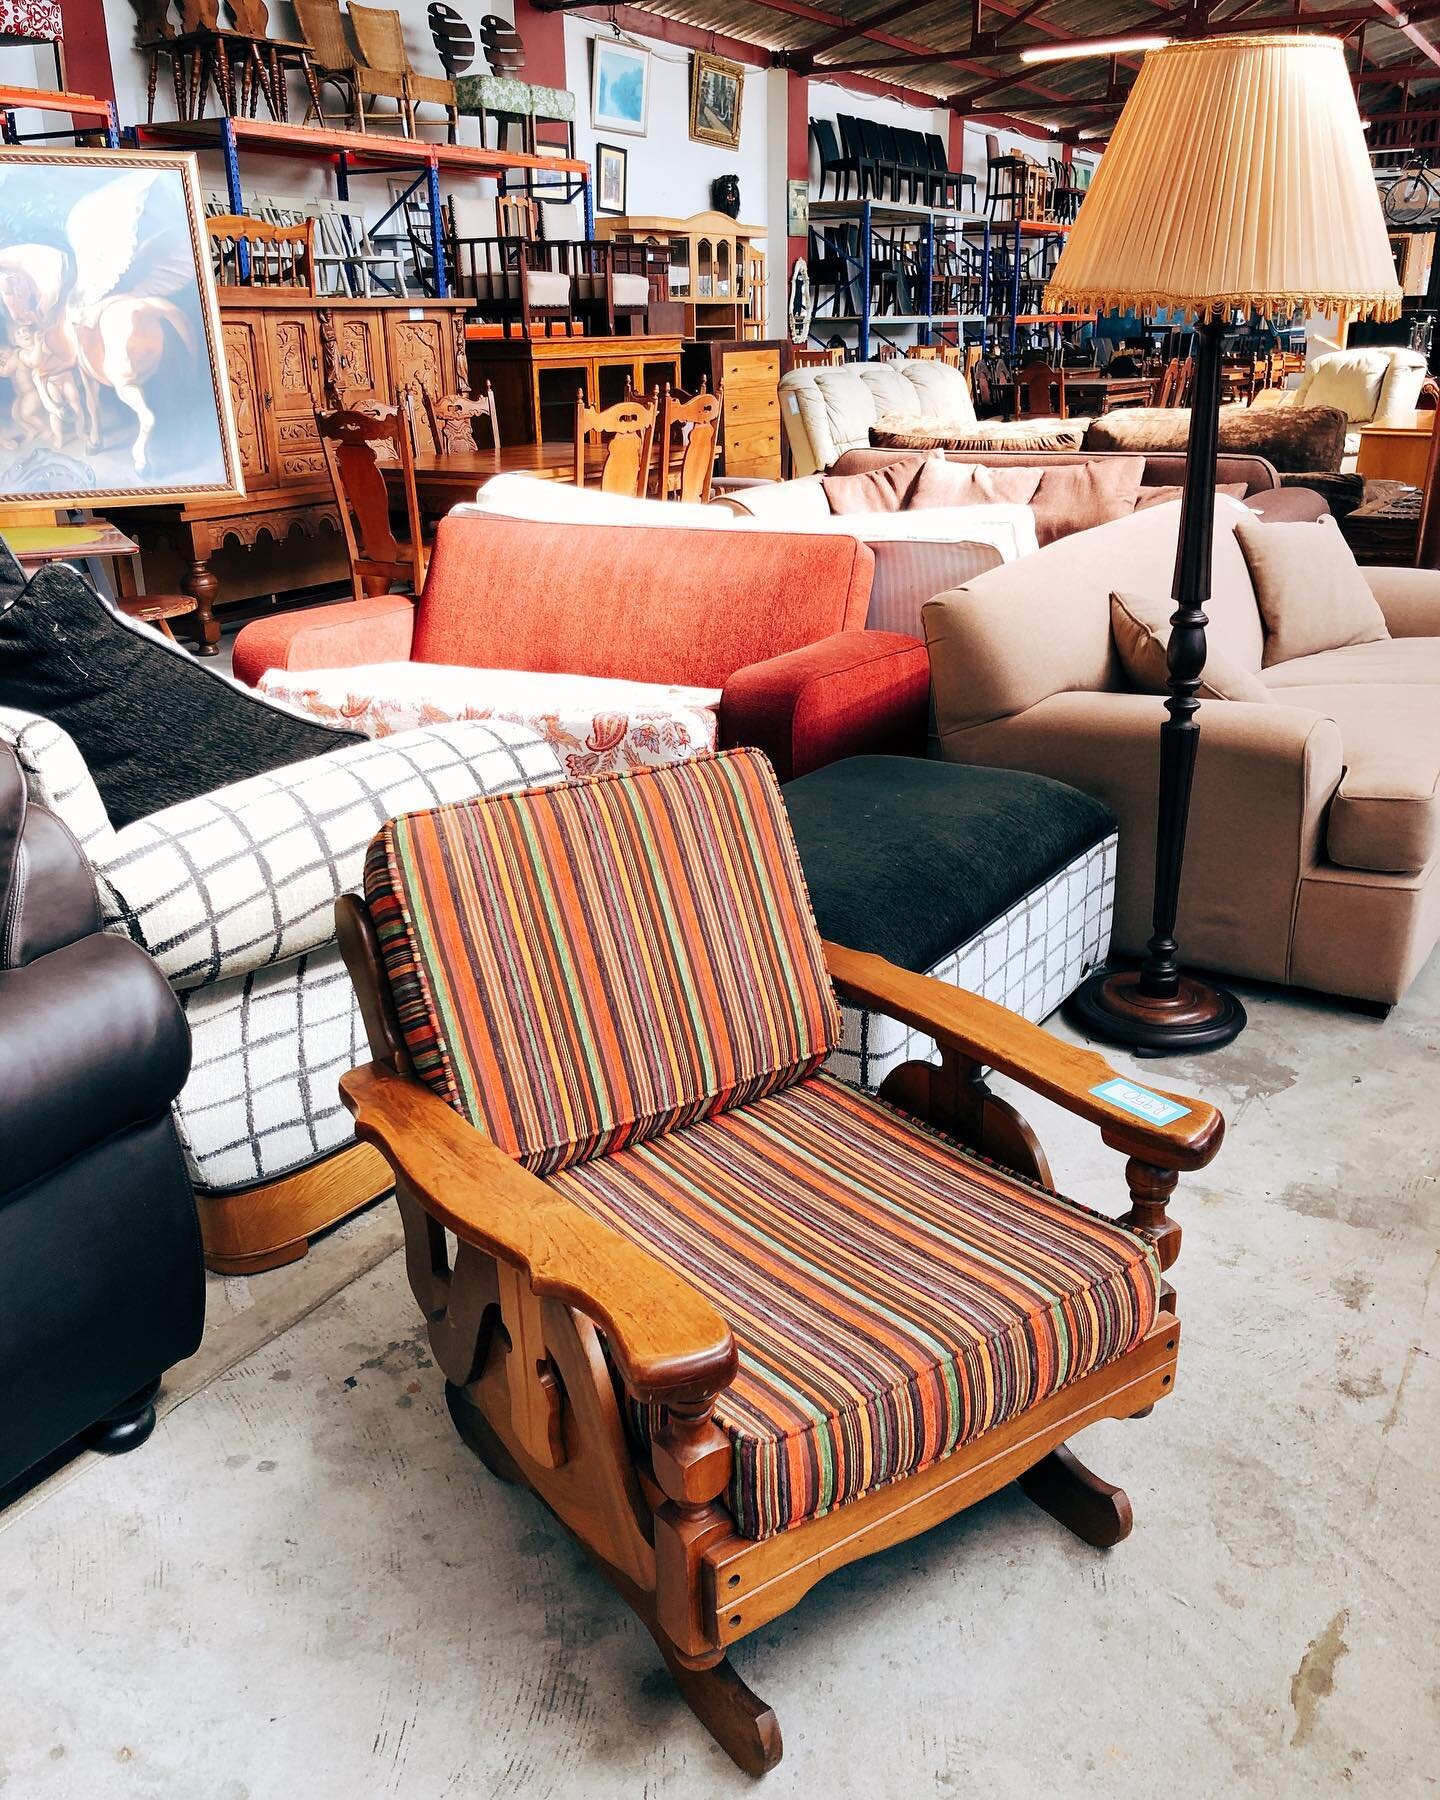 Be kind to your bones with a comfortable &amp; beautiful armchair for your home 😅👌

We&rsquo;ve got something for everyone, stop by this weekend for a coffee &amp; a browse. We close at 5pm on weekdays and 1pm on Saturdays.

Rocking Chair with stri